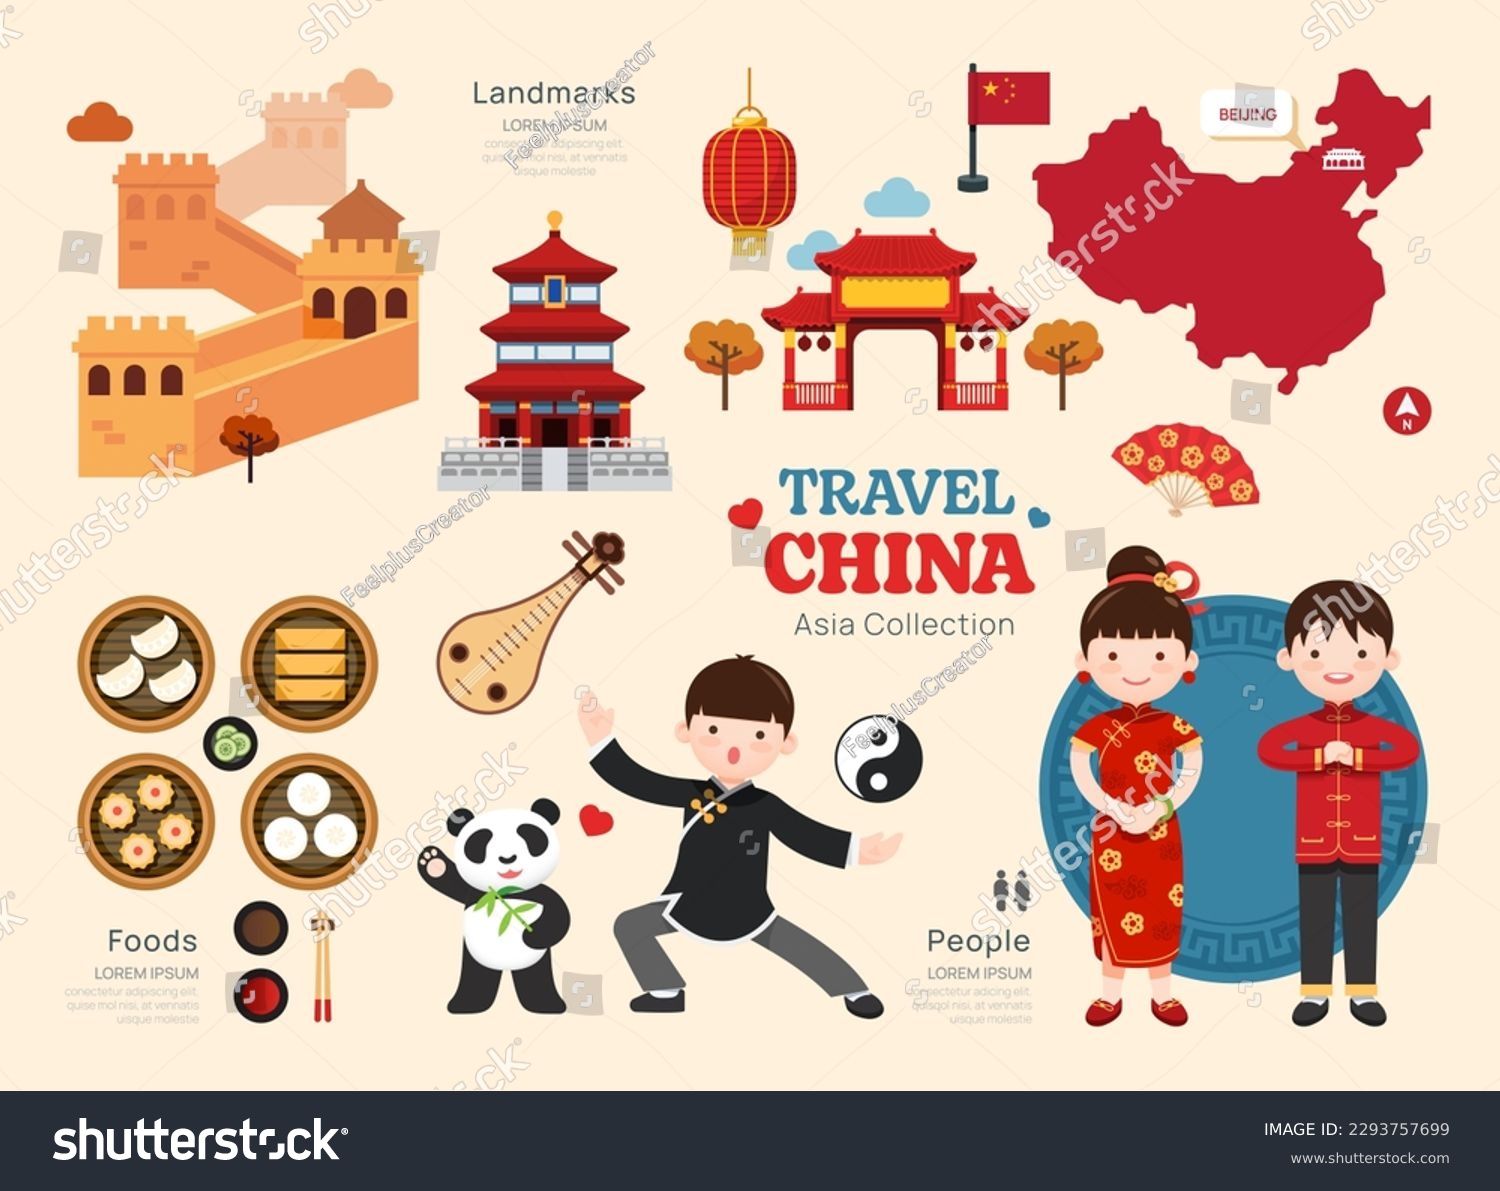 SVG of Travel China flat icons set. chinese element icon map and landmarks symbols and objects collection. vector illustration. svg